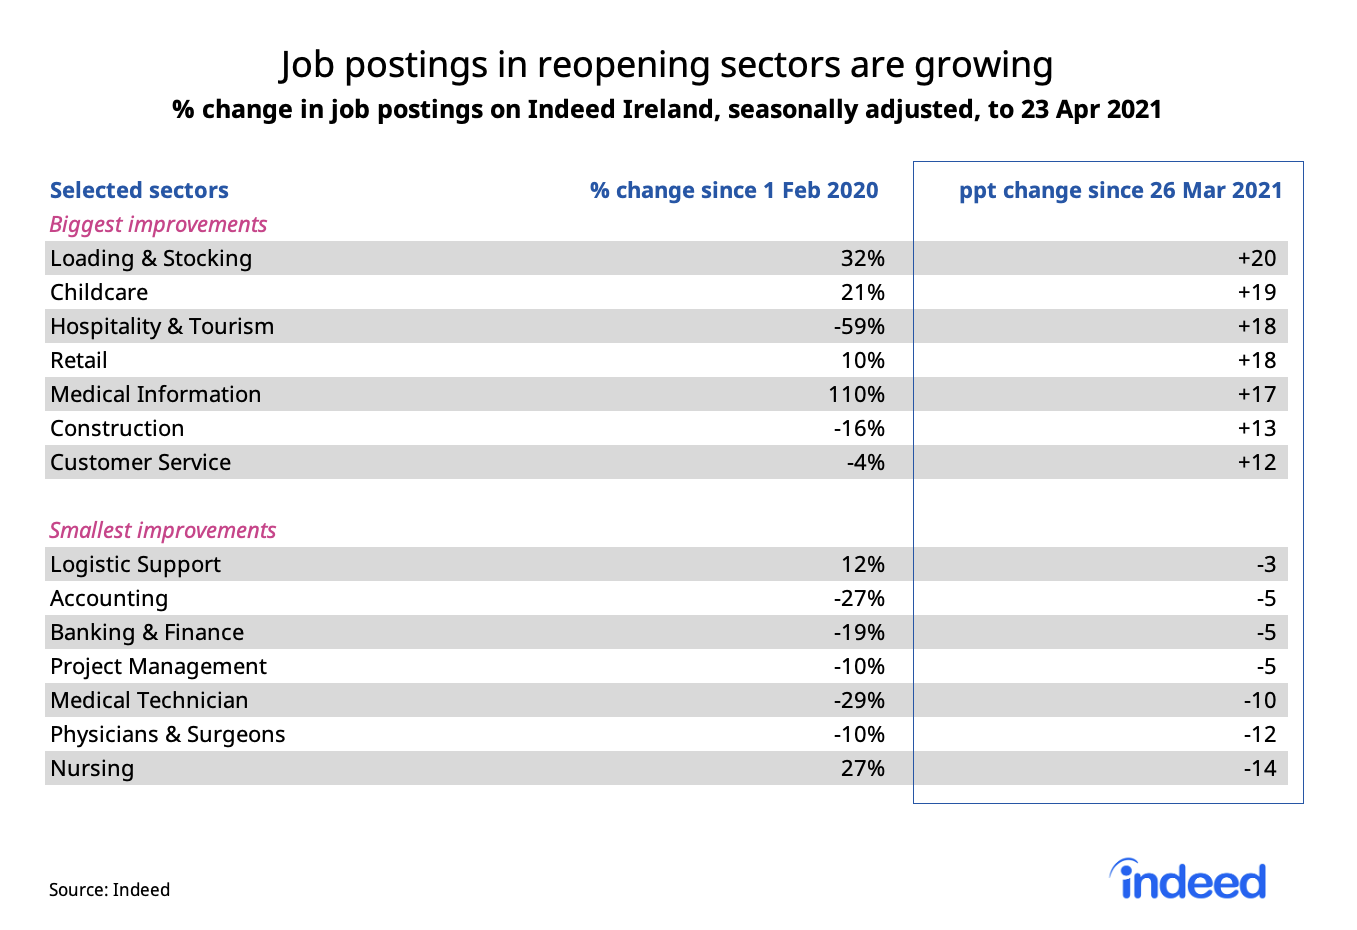 Table showing job postings in reopening sectors are growing